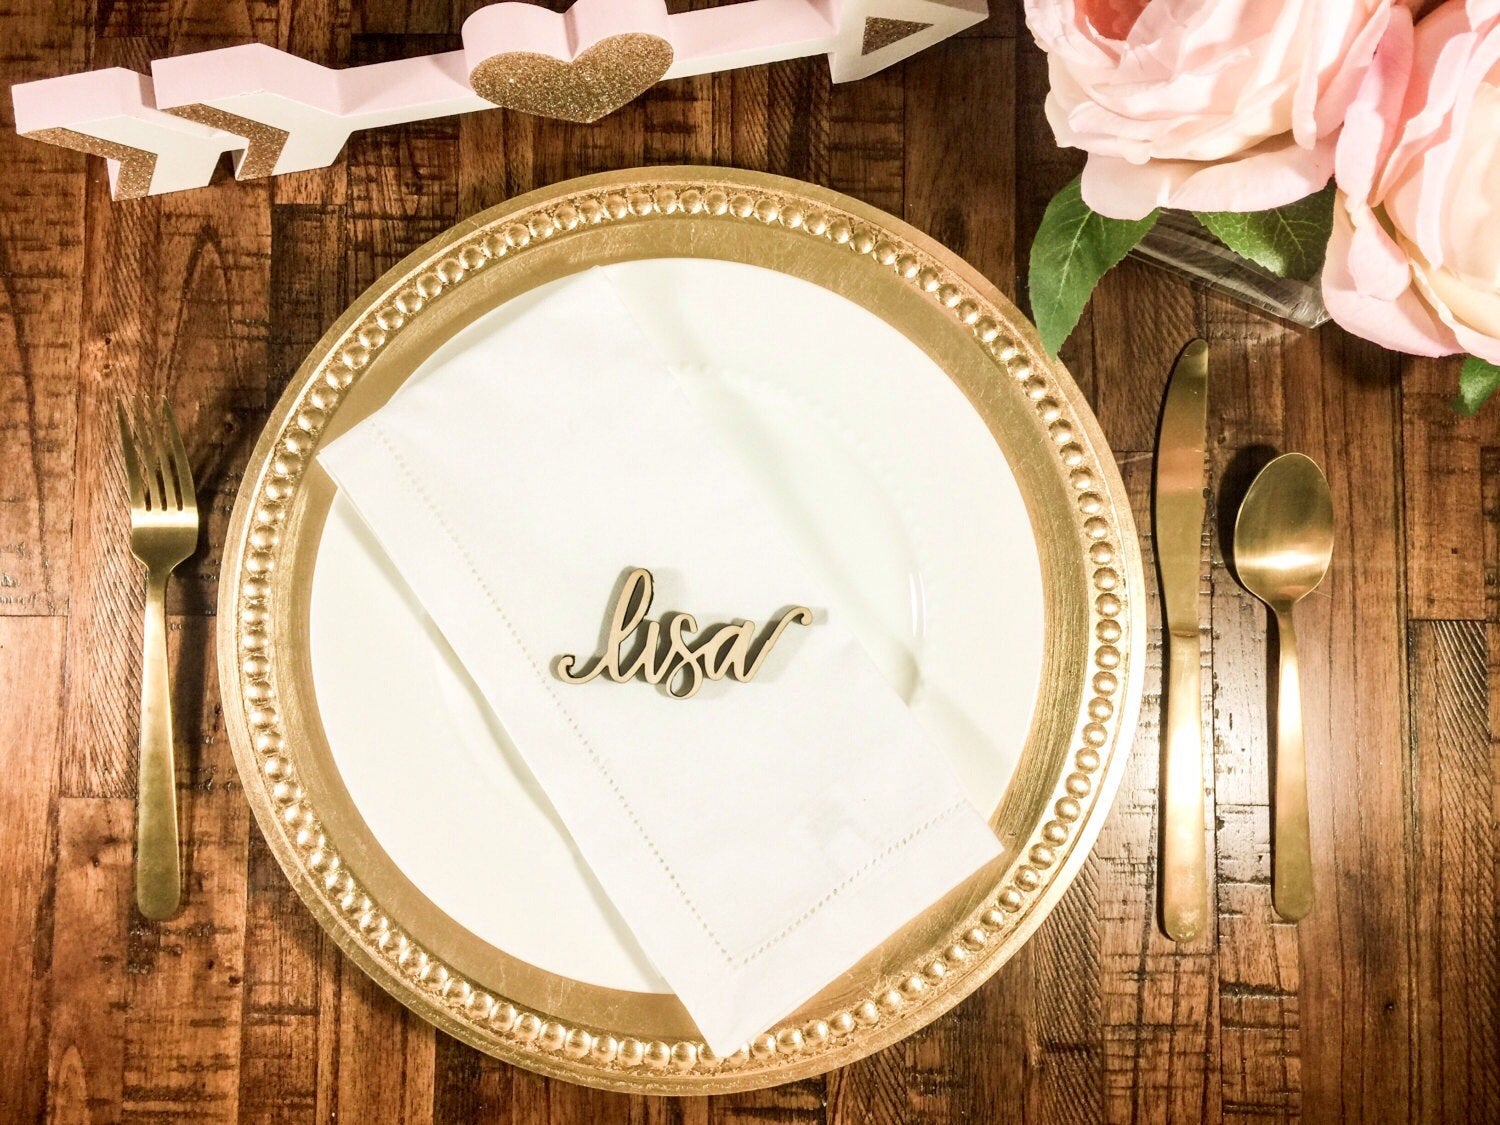 Wooden Name Place Setting for Wedding Guests - Happyism, Inc. Engraving 